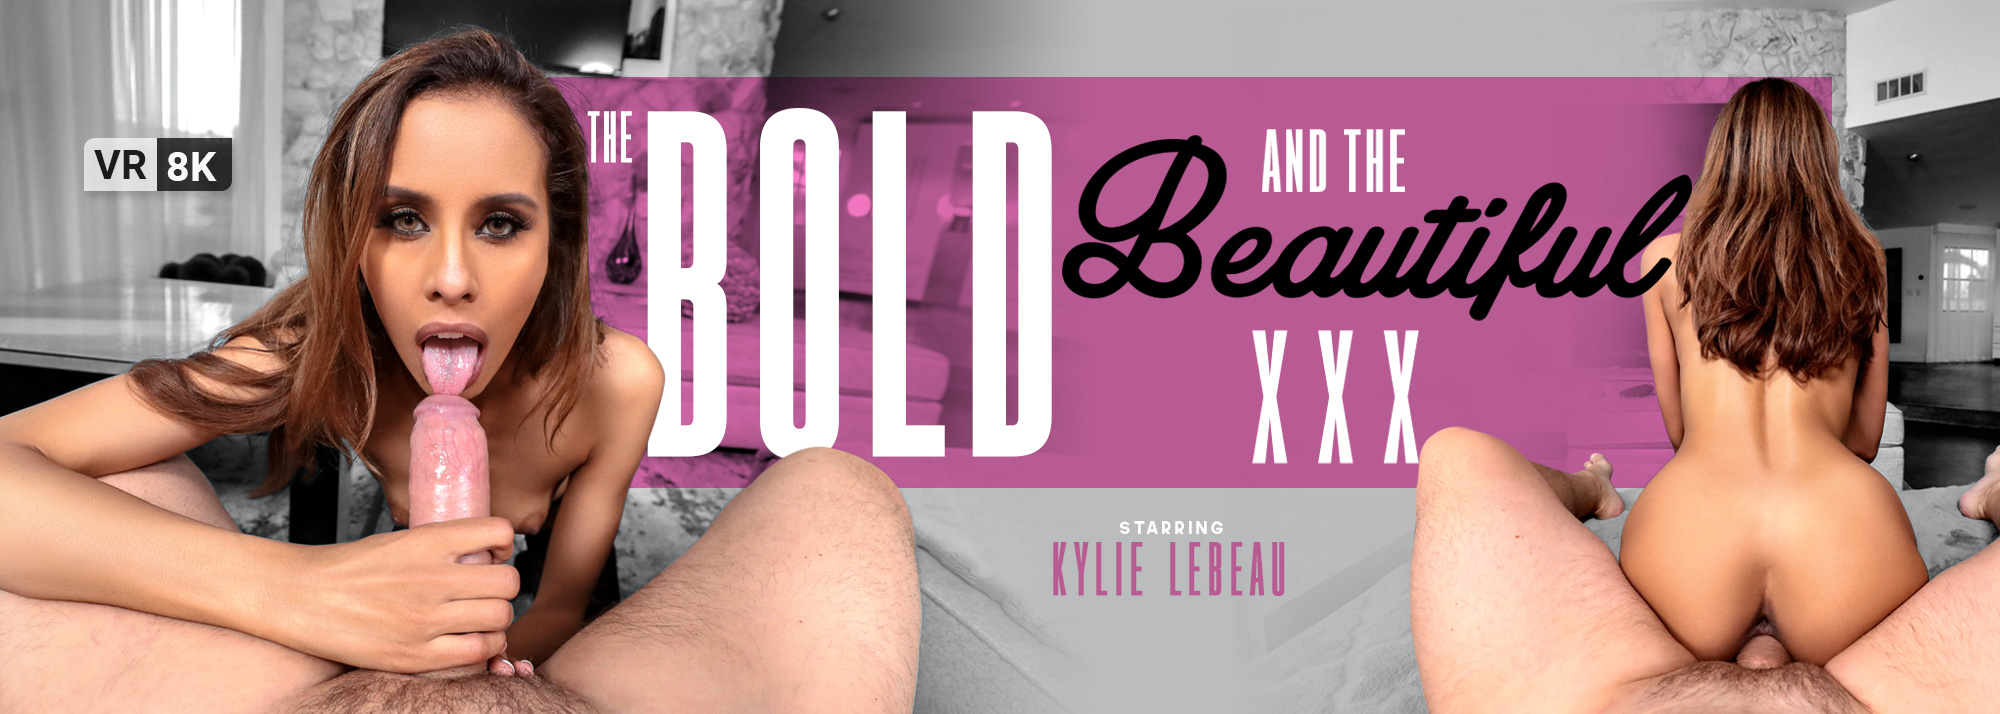 The Bold and The Beautiful XXX VR Porn Video: 8K, 4K, Full HD and 180/360  POV | VR Bangers